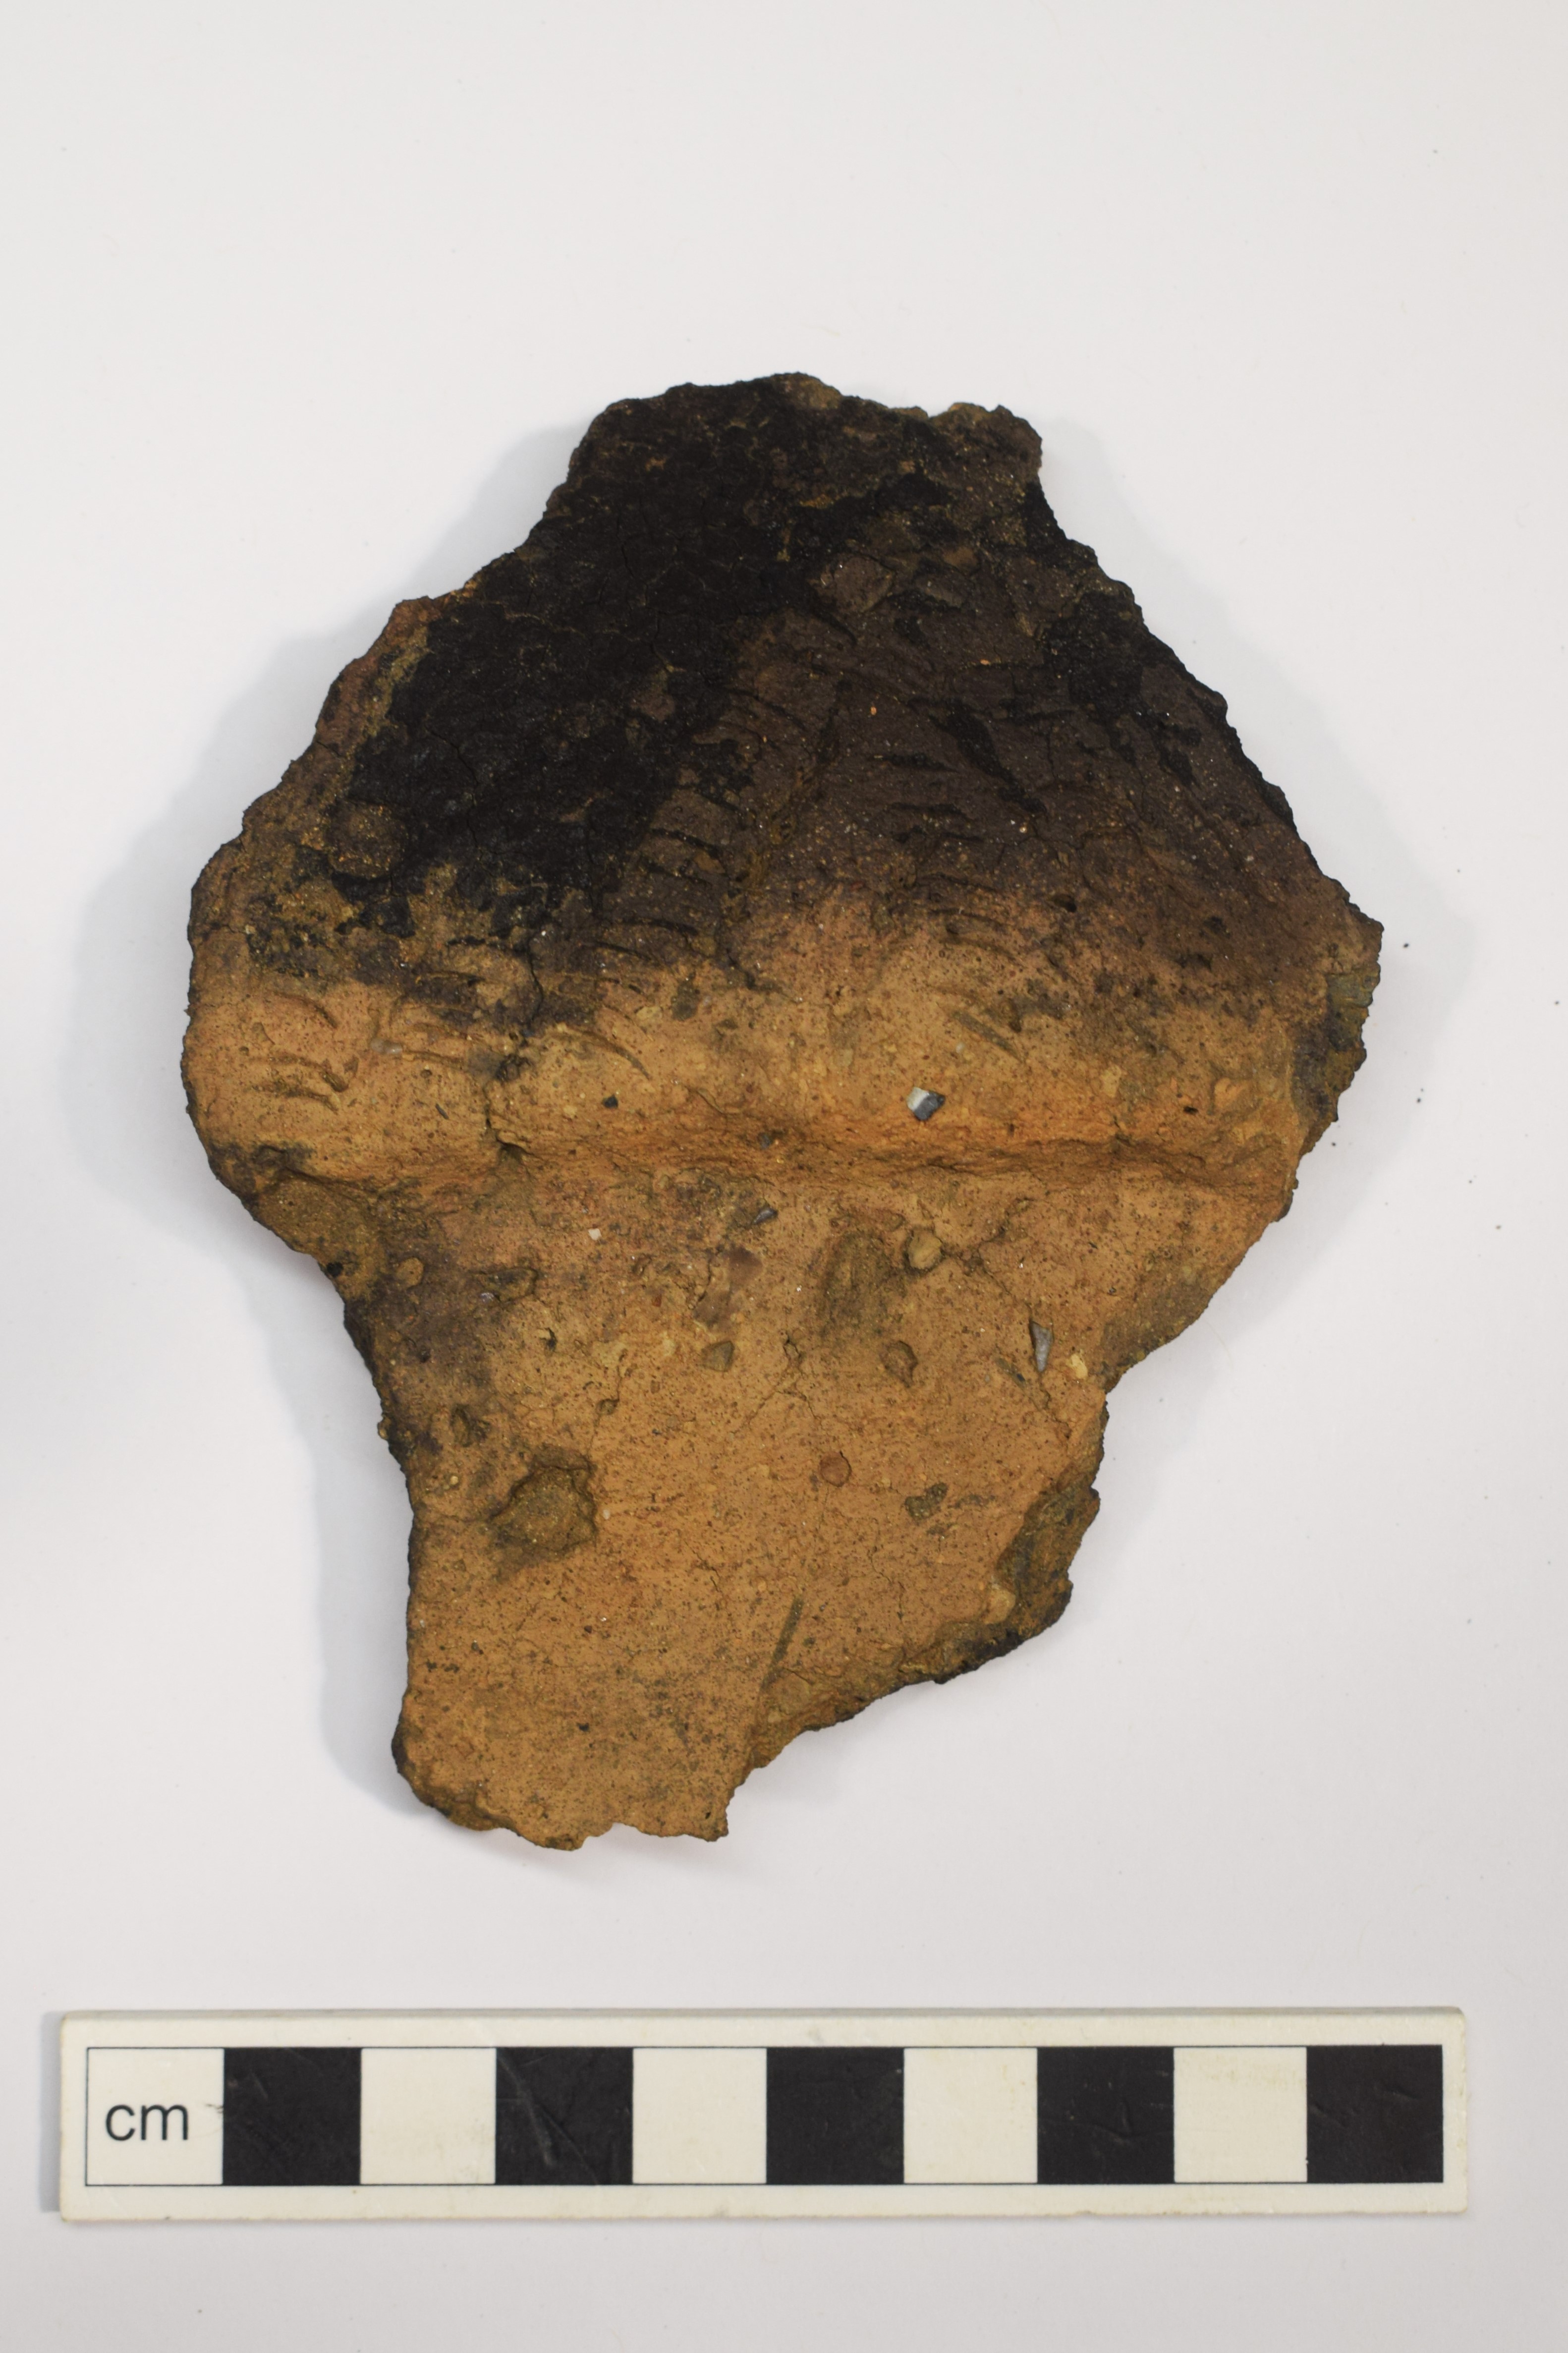 Fragment of collared urn, black at the top and orange at the bottom, on a white background.